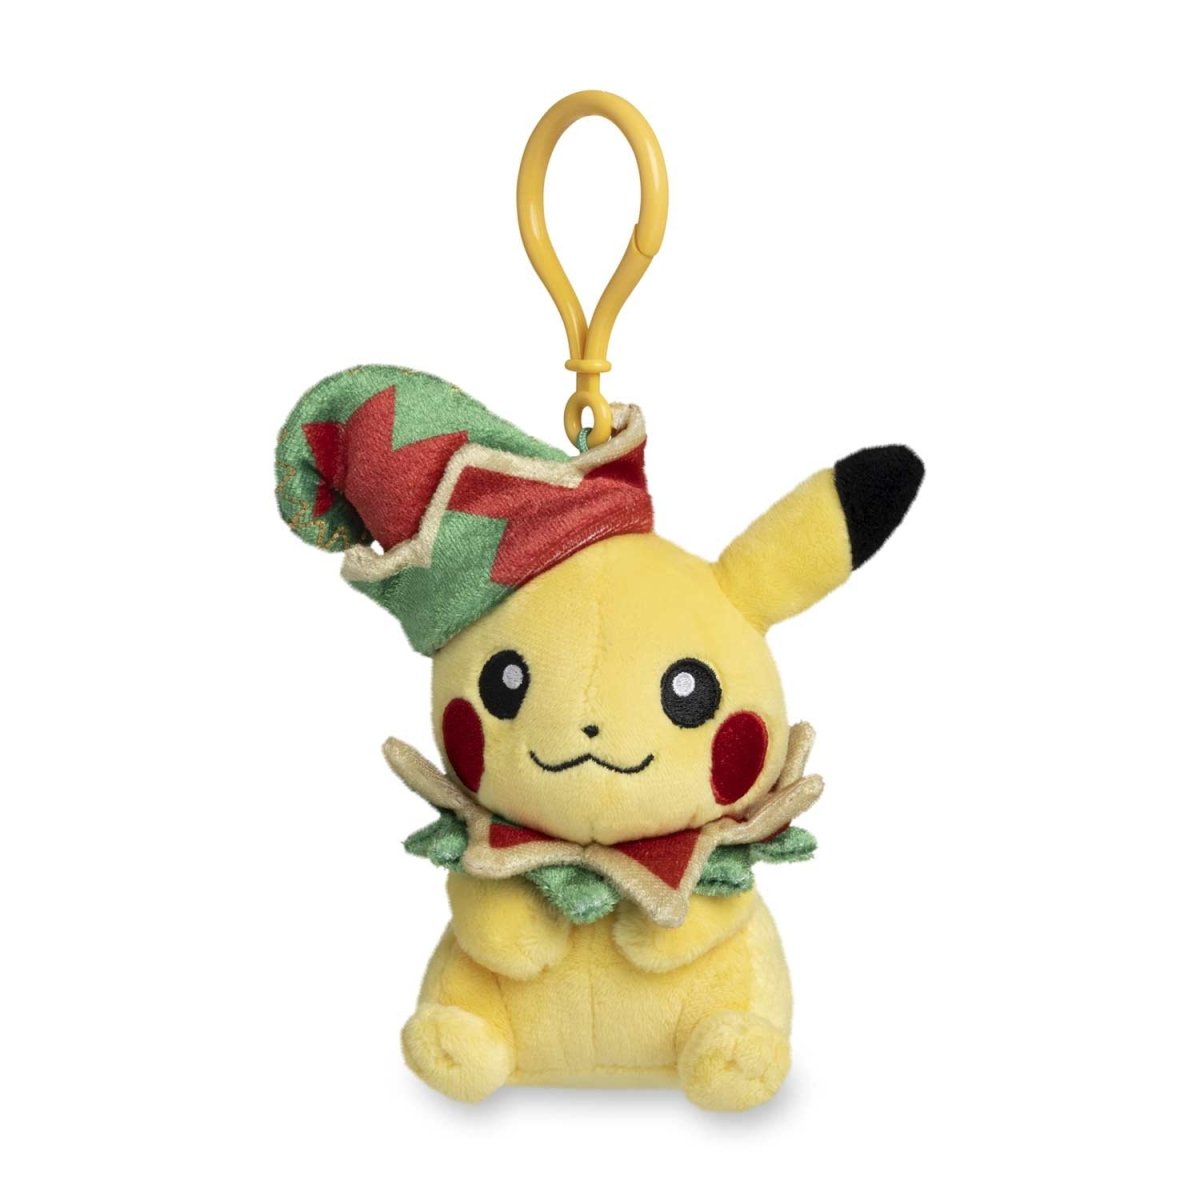 Pokémon” and Beams Collaborate on Shiny Pikachu Keychain and Plushie!, Product News